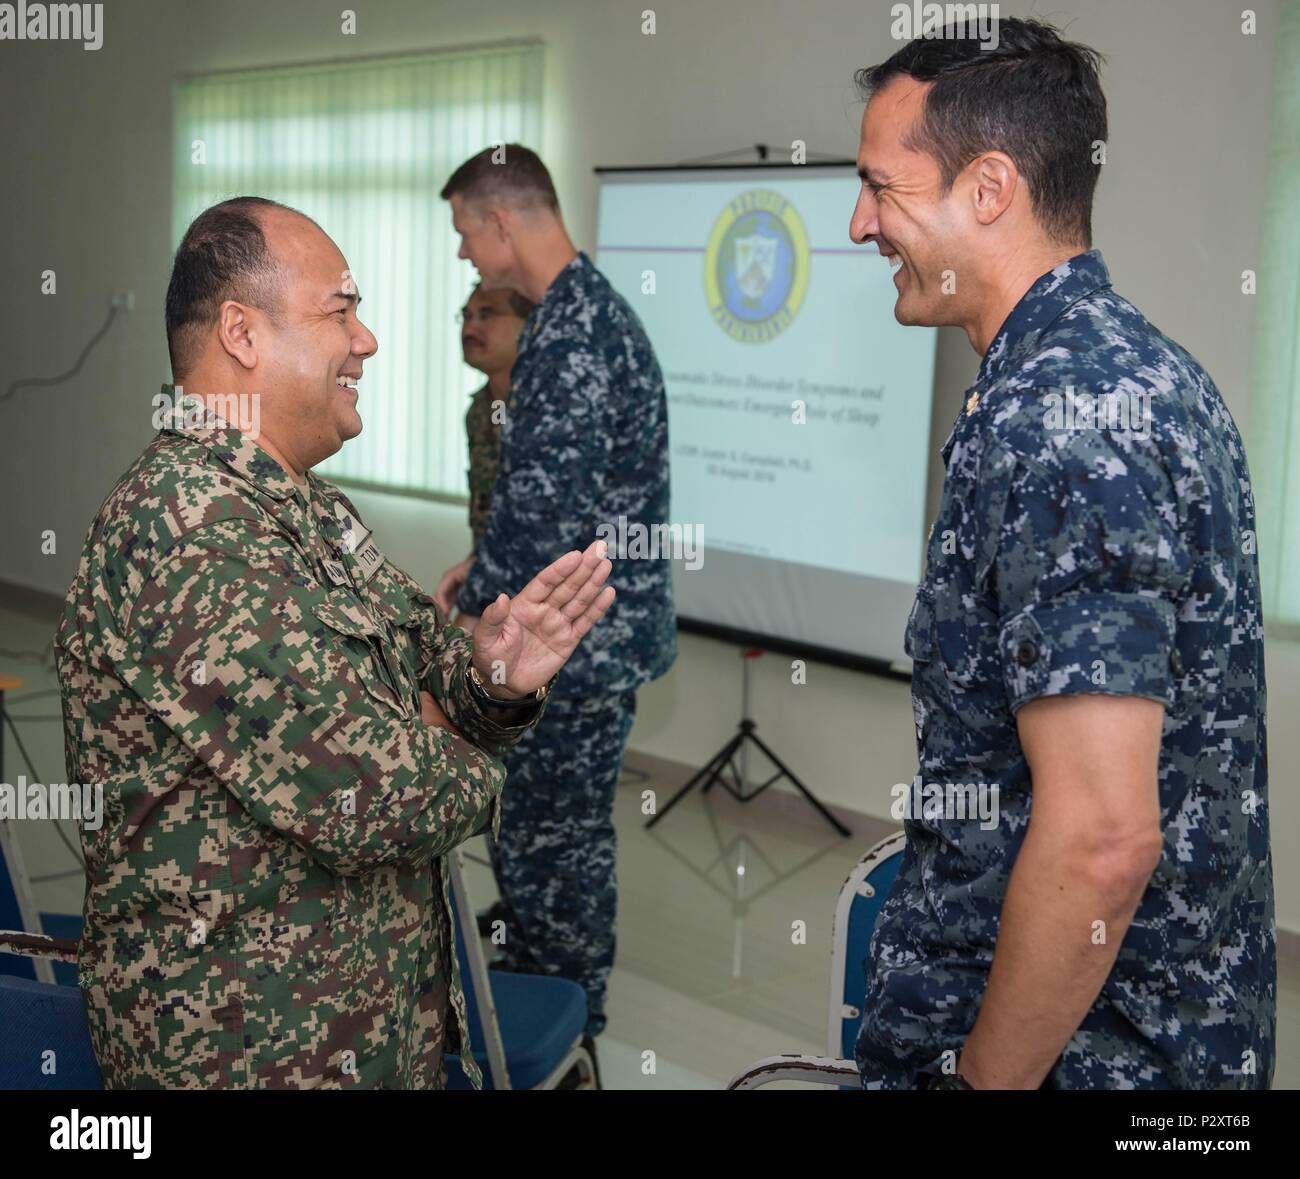 160811-N-QW941-060 KUANTAN, Malaysia (Aug. 11, 2016) Malaysian Army Col., Adnan Bin Abdullah (left), from Malacca, Malaysia, speaks with Cmdr. Fernando Leyva, from Charlotte, North Carolina and physician assigned to hospital ship USNS Mercy (T-AH 19), during a Pacific Partnership 2016 operational medicine symposium. During the symposium, Malaysian Army service members and Pacific Partnership 2016 personnel discussed mental health issues related to combat deployment, cardiology topics relative to operational platforms within diving, and Malaysian Armed Forces experiences with rapid medical resp Stock Photo